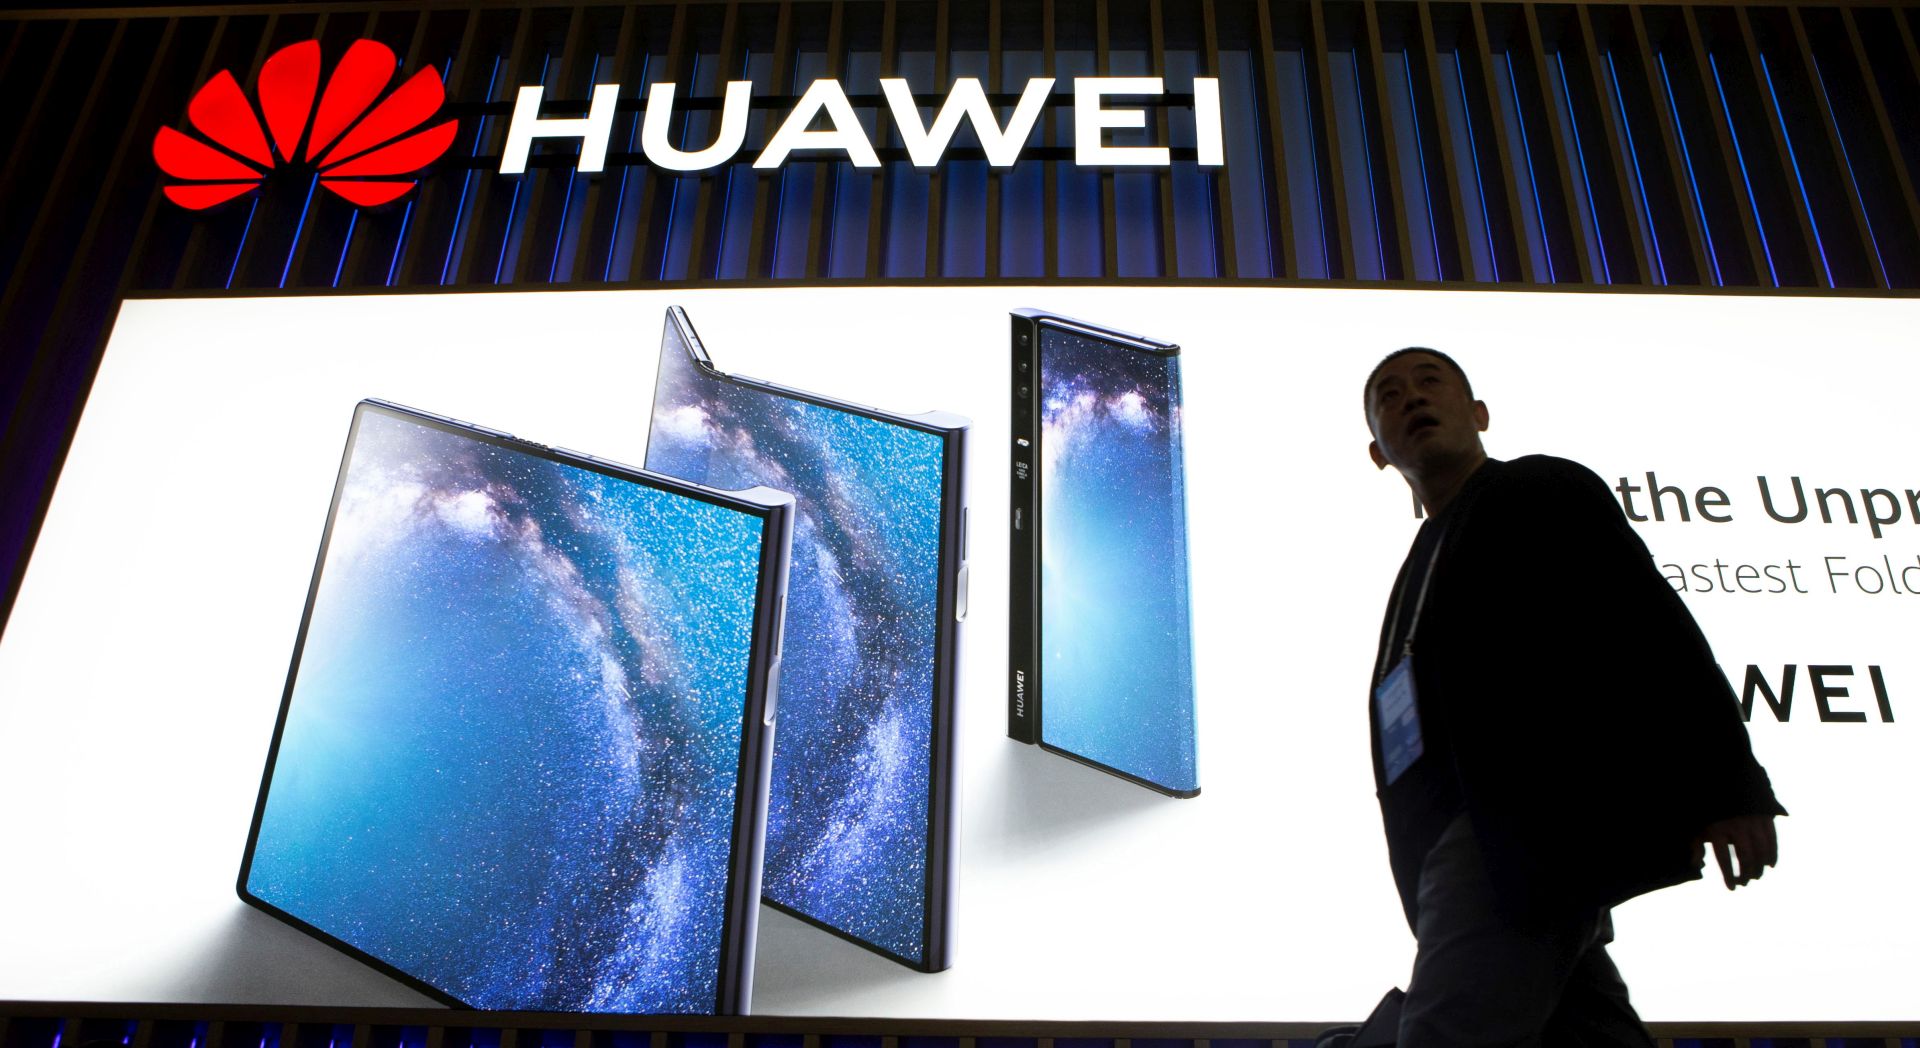 epa07396786 A visitor walks past the stand of Huawei on the opening day of the Mobile World Congress 2019 (MWC19), in Barcelona, Spain, 25 February 2019. The MWC19 will present the latest advances in mobile technologies from 25 to 28 February at the Fira Barcelona Montjuic.  EPA/Enric Fontcuberta